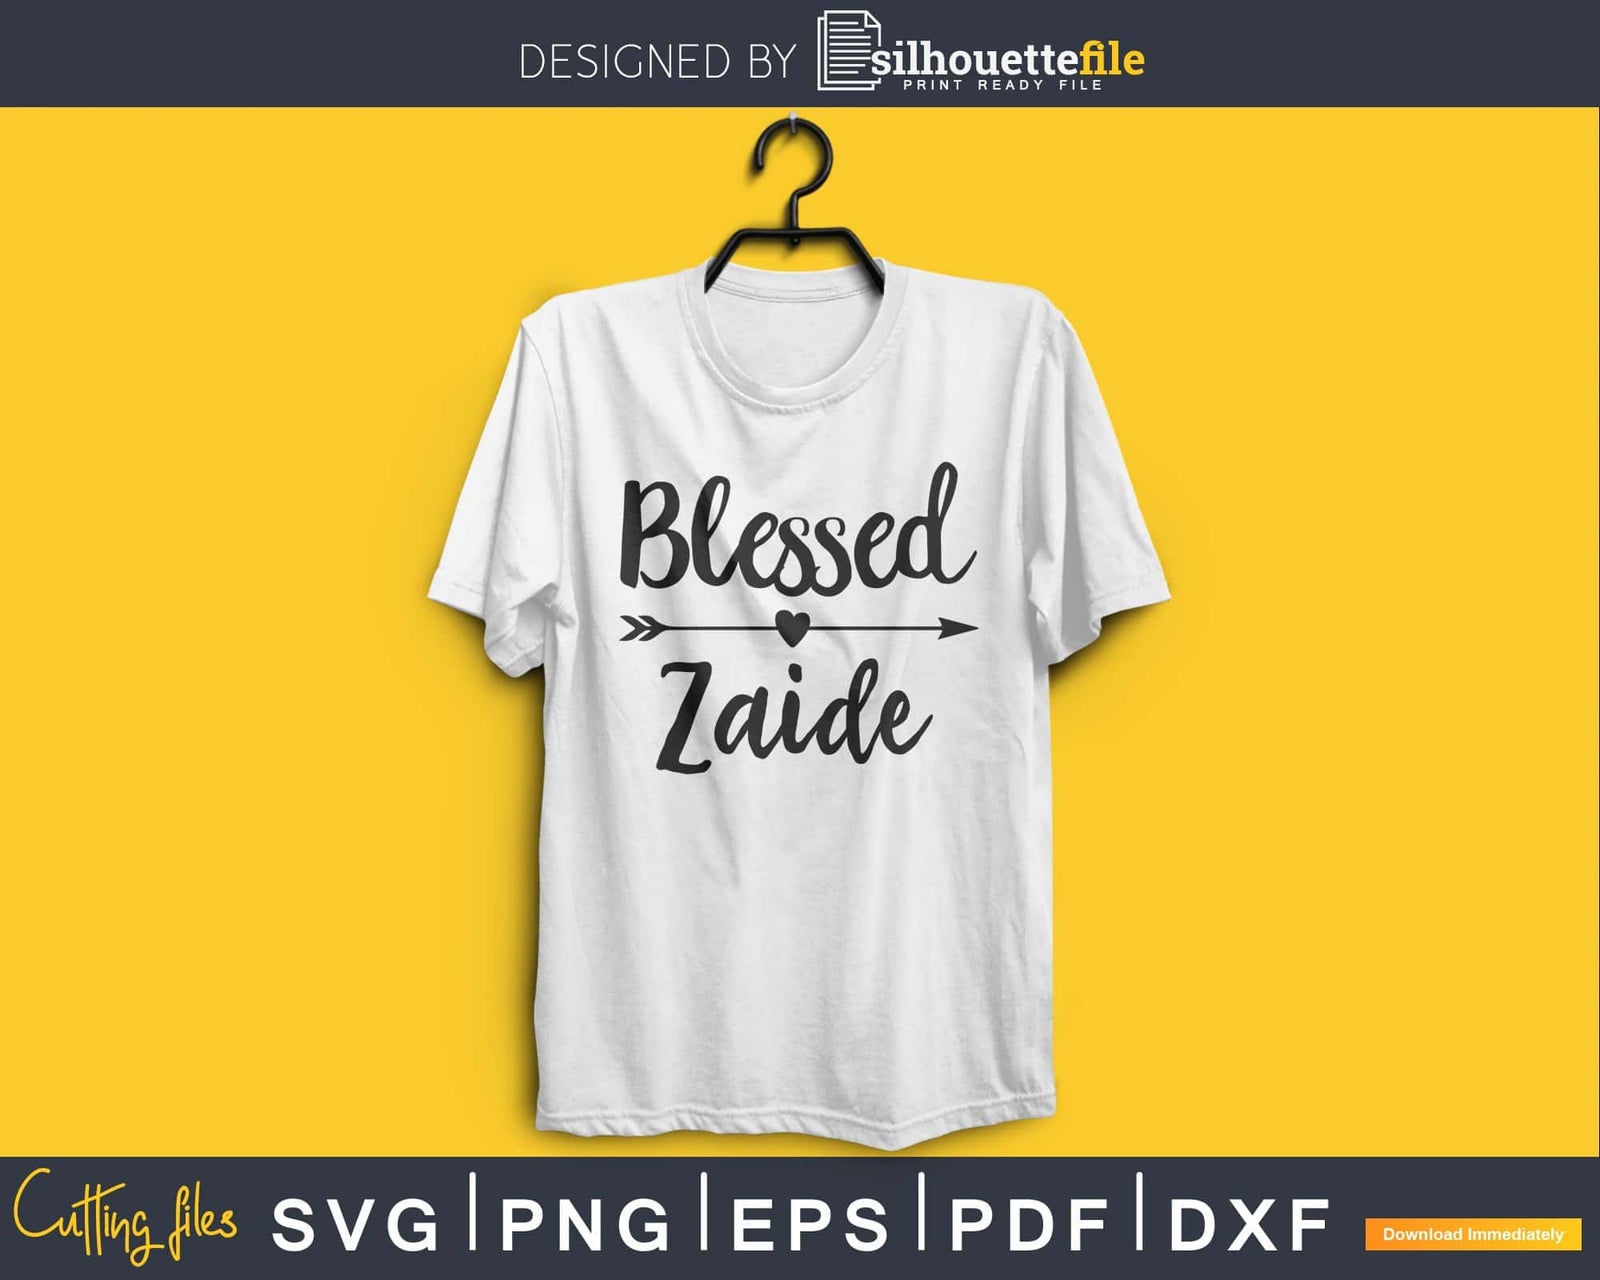 Blessed Zaide SVG Digital cricut printable file | Silhouettefile